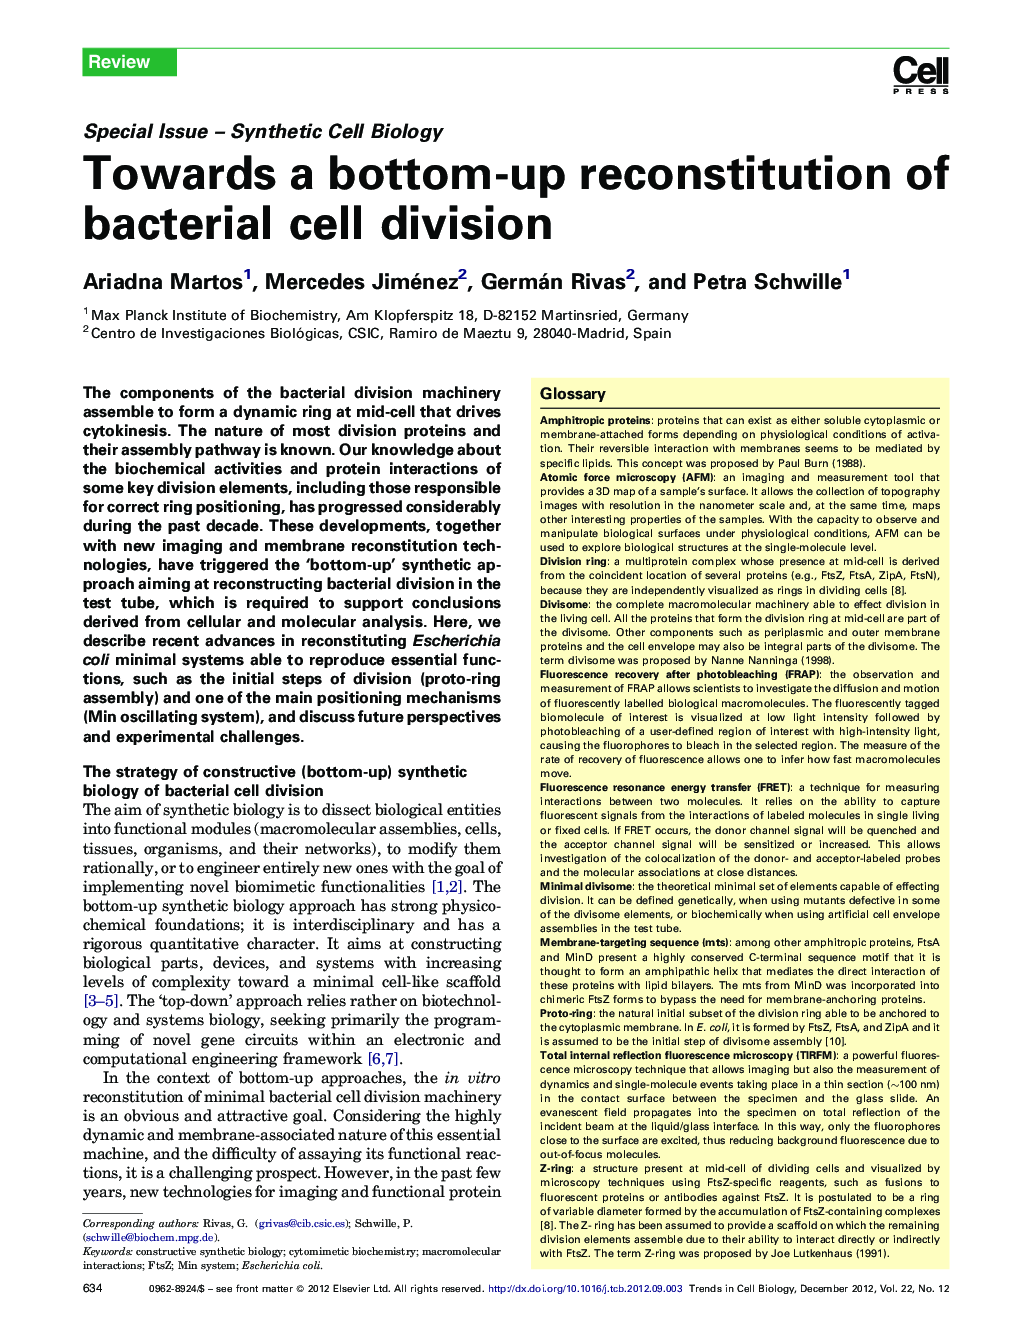 Towards a bottom-up reconstitution of bacterial cell division